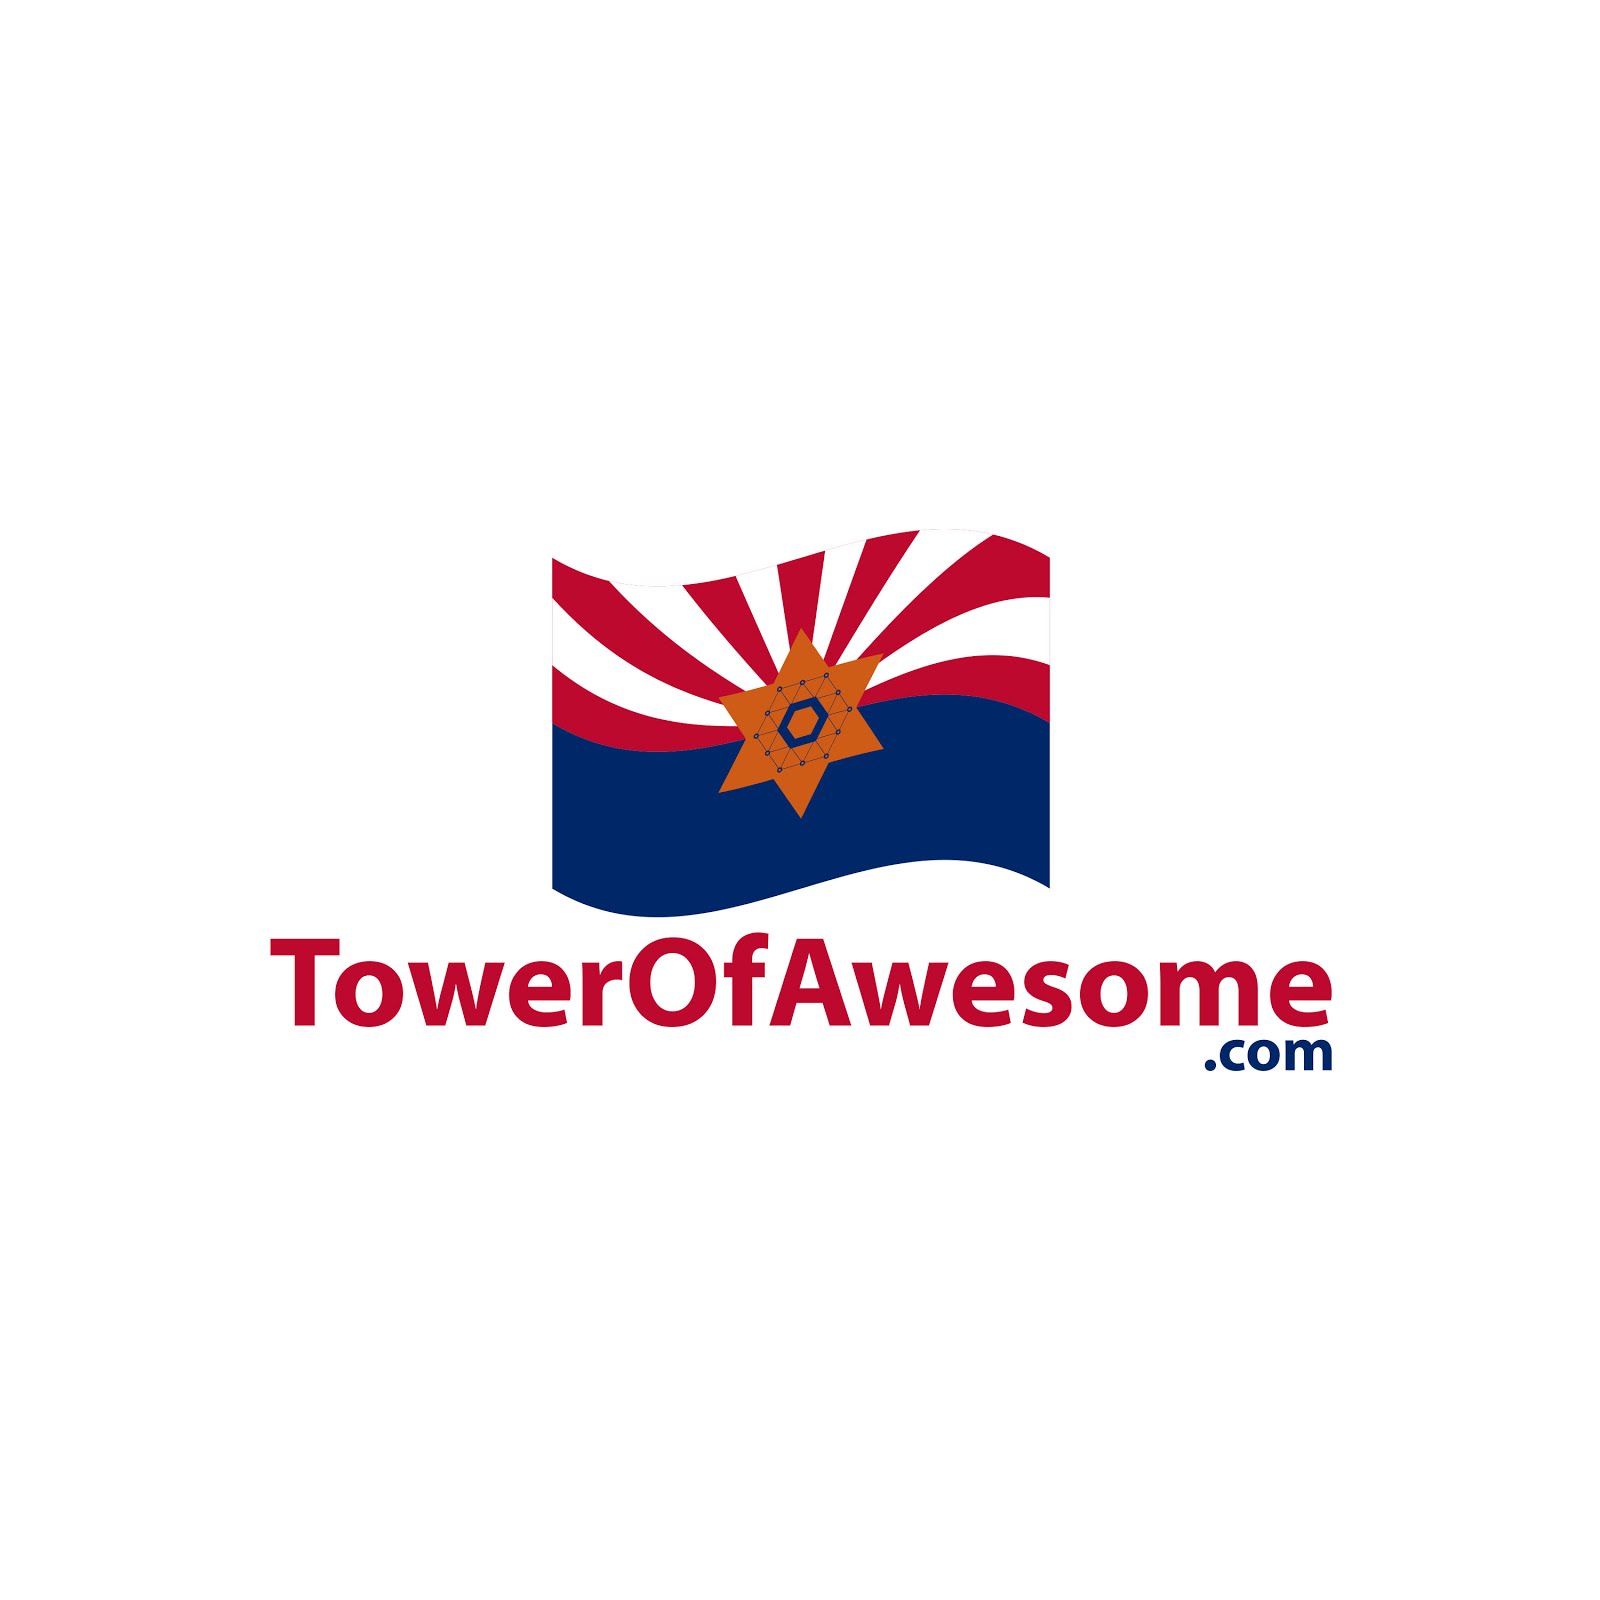 Tower of awesome logo